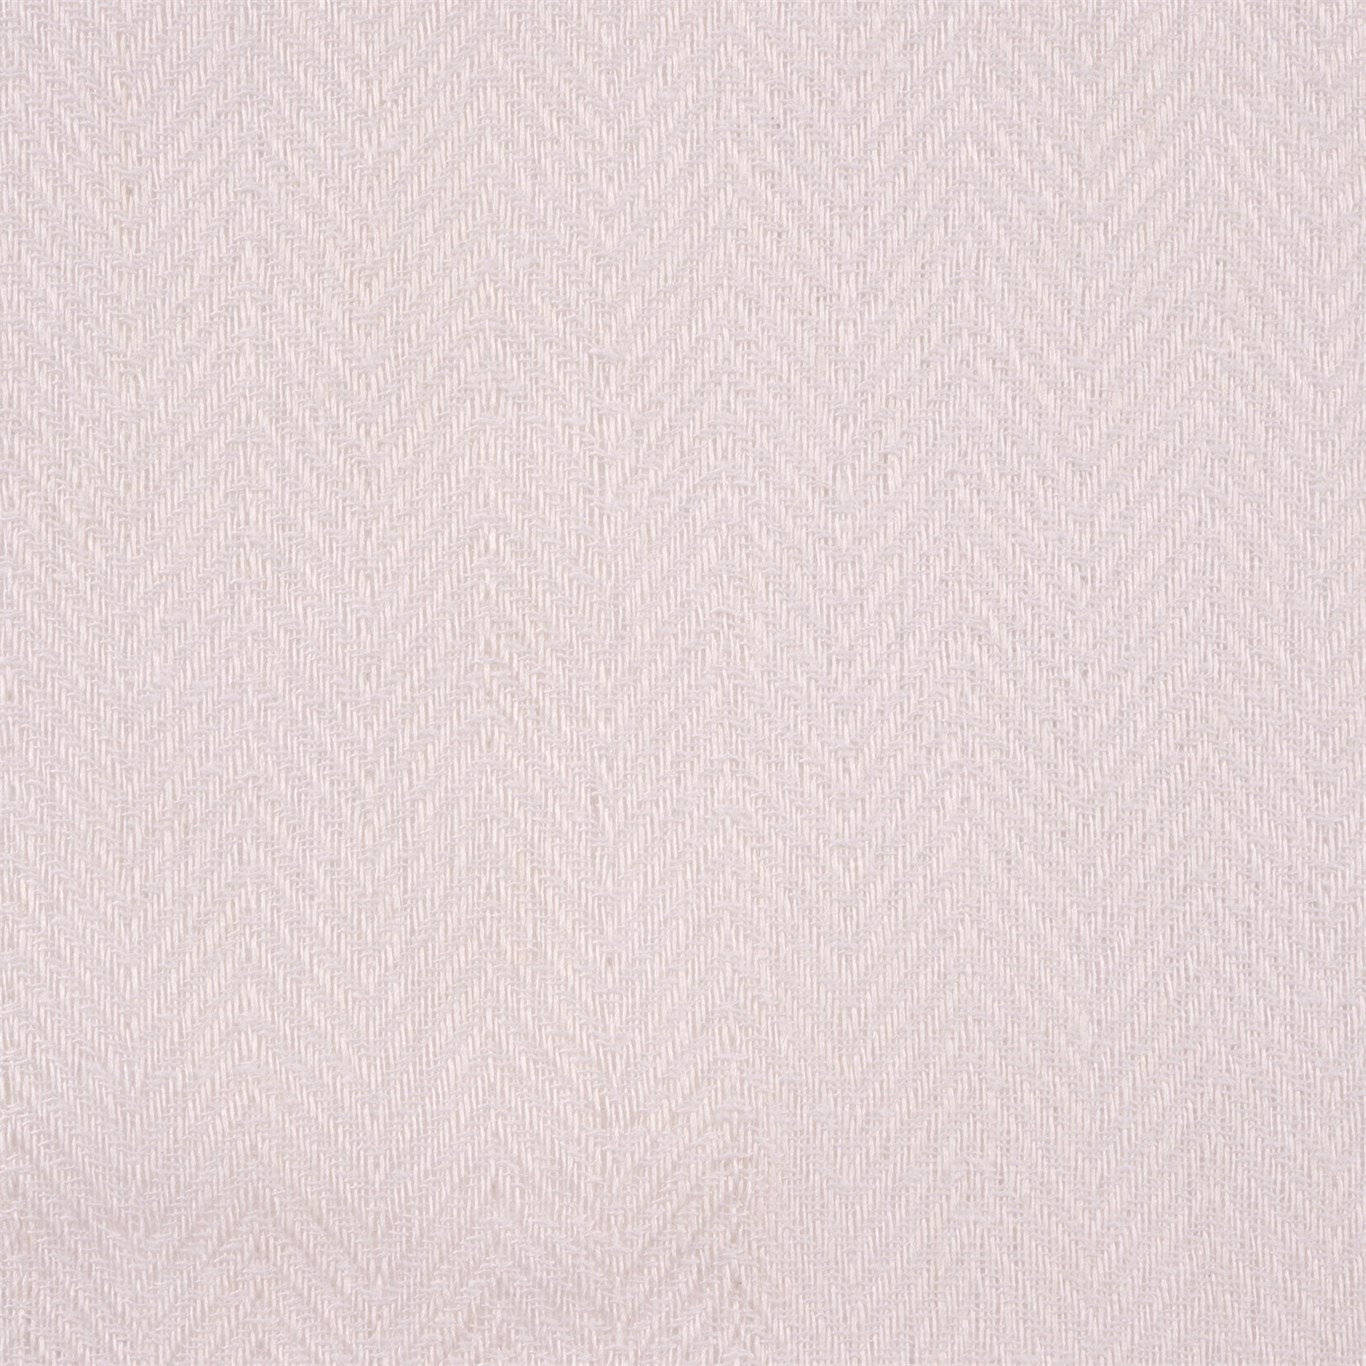 Purity Voiles Ivory Fabric by HAR